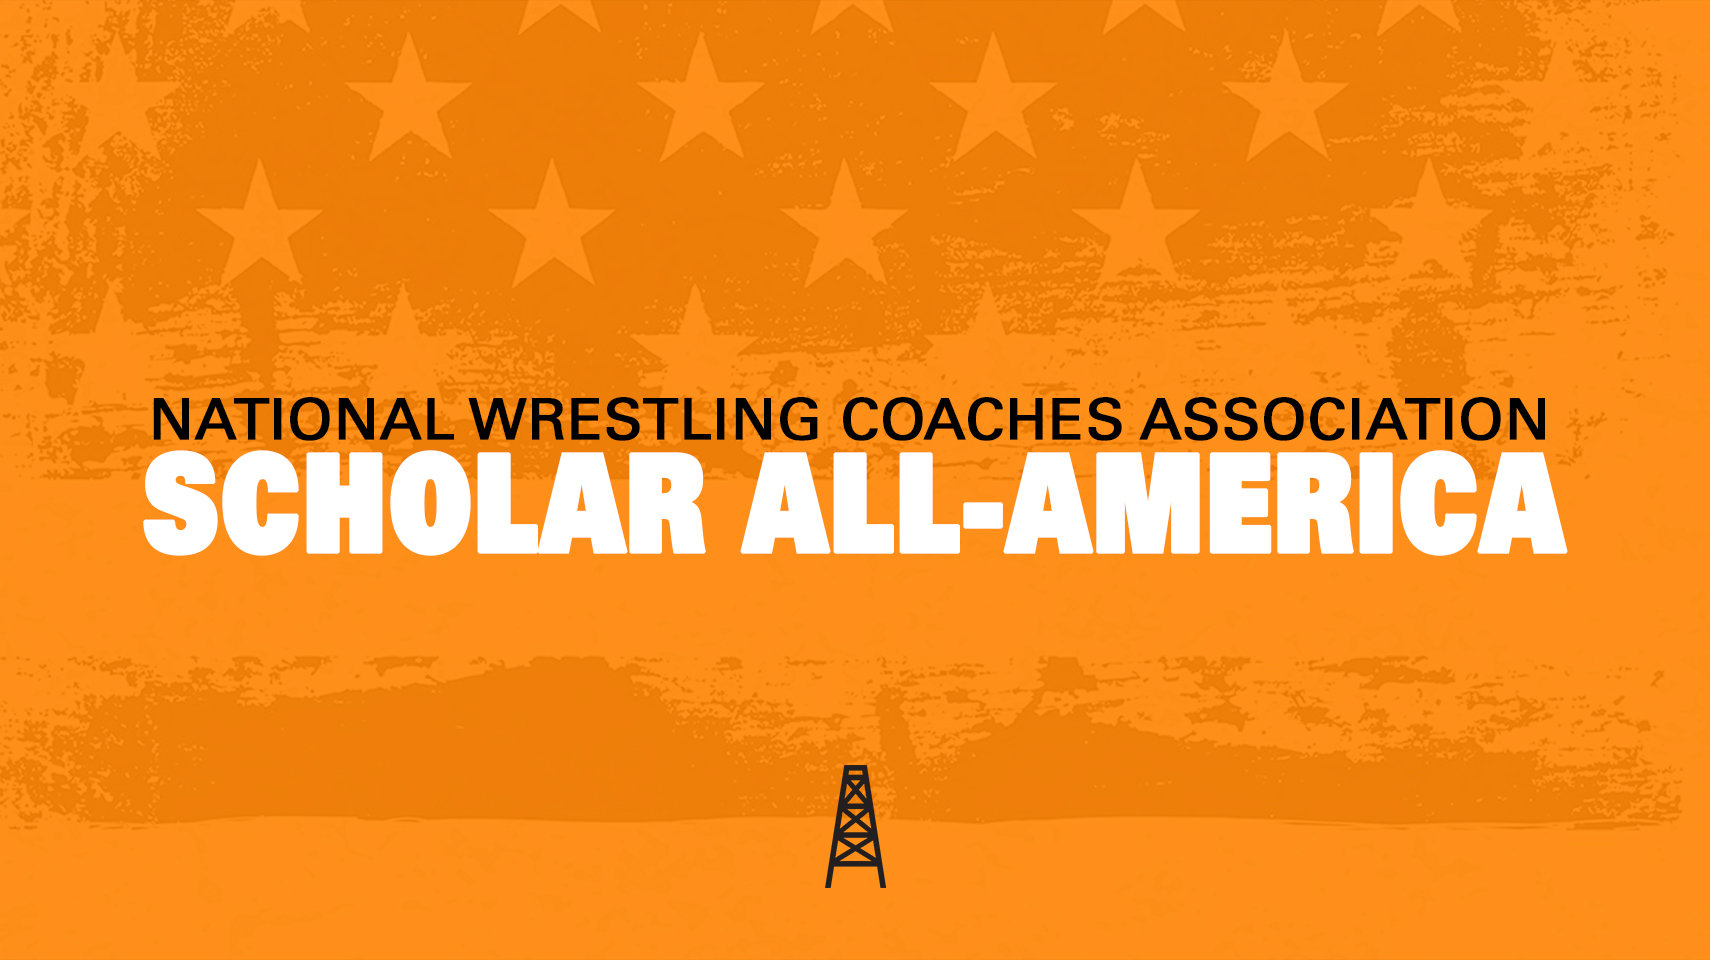 2022 Scholar All-America team from the National Wrestling Coaches Association